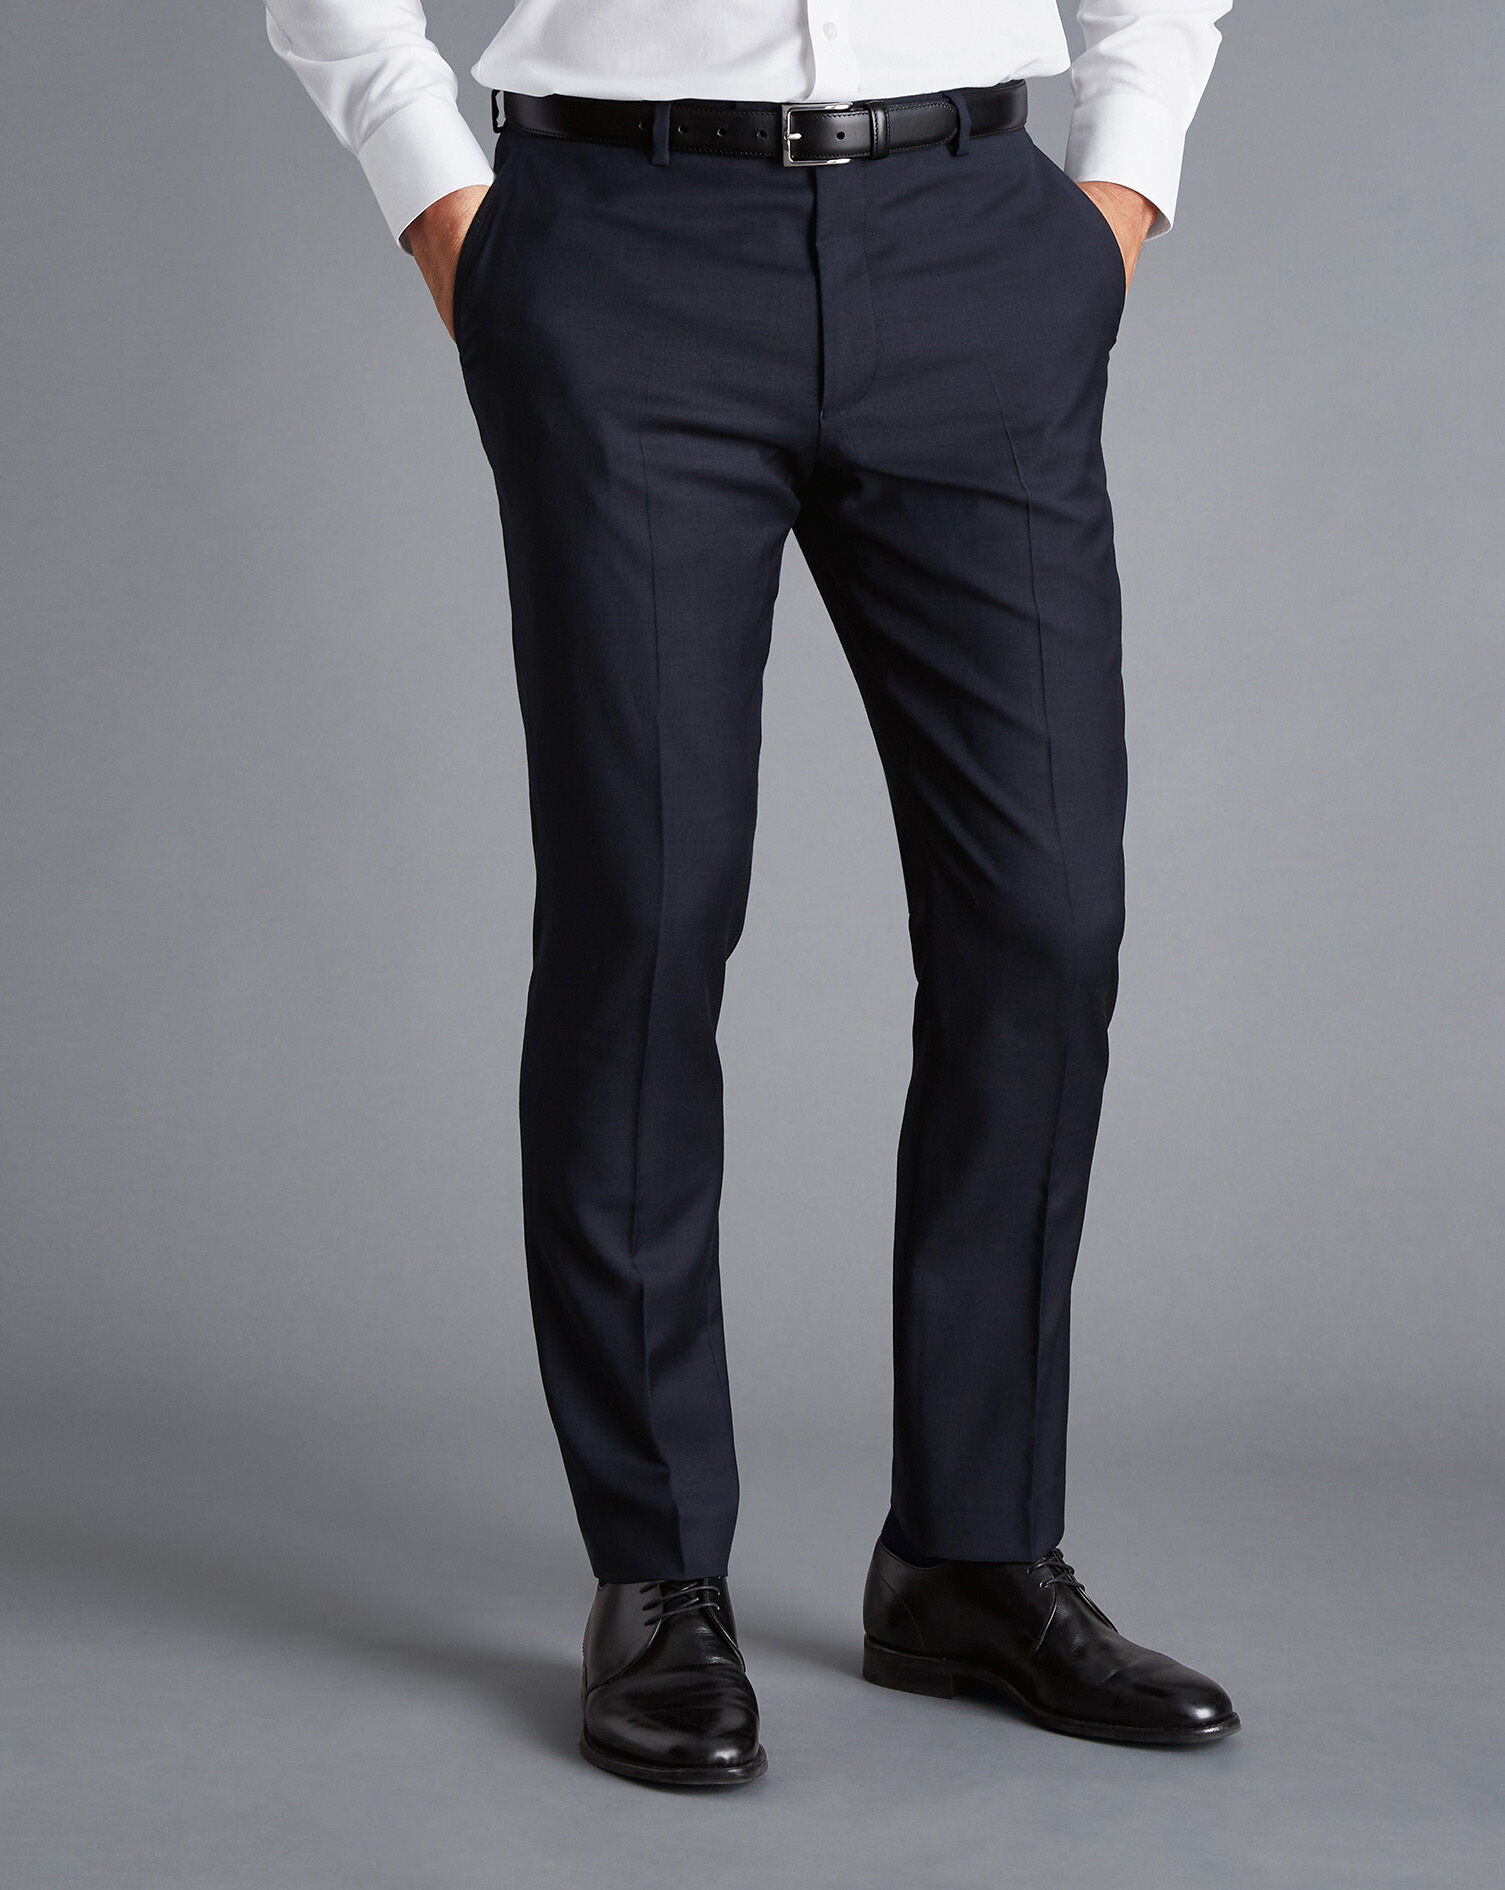 Details more than 69 stretch suit trousers best - in.cdgdbentre